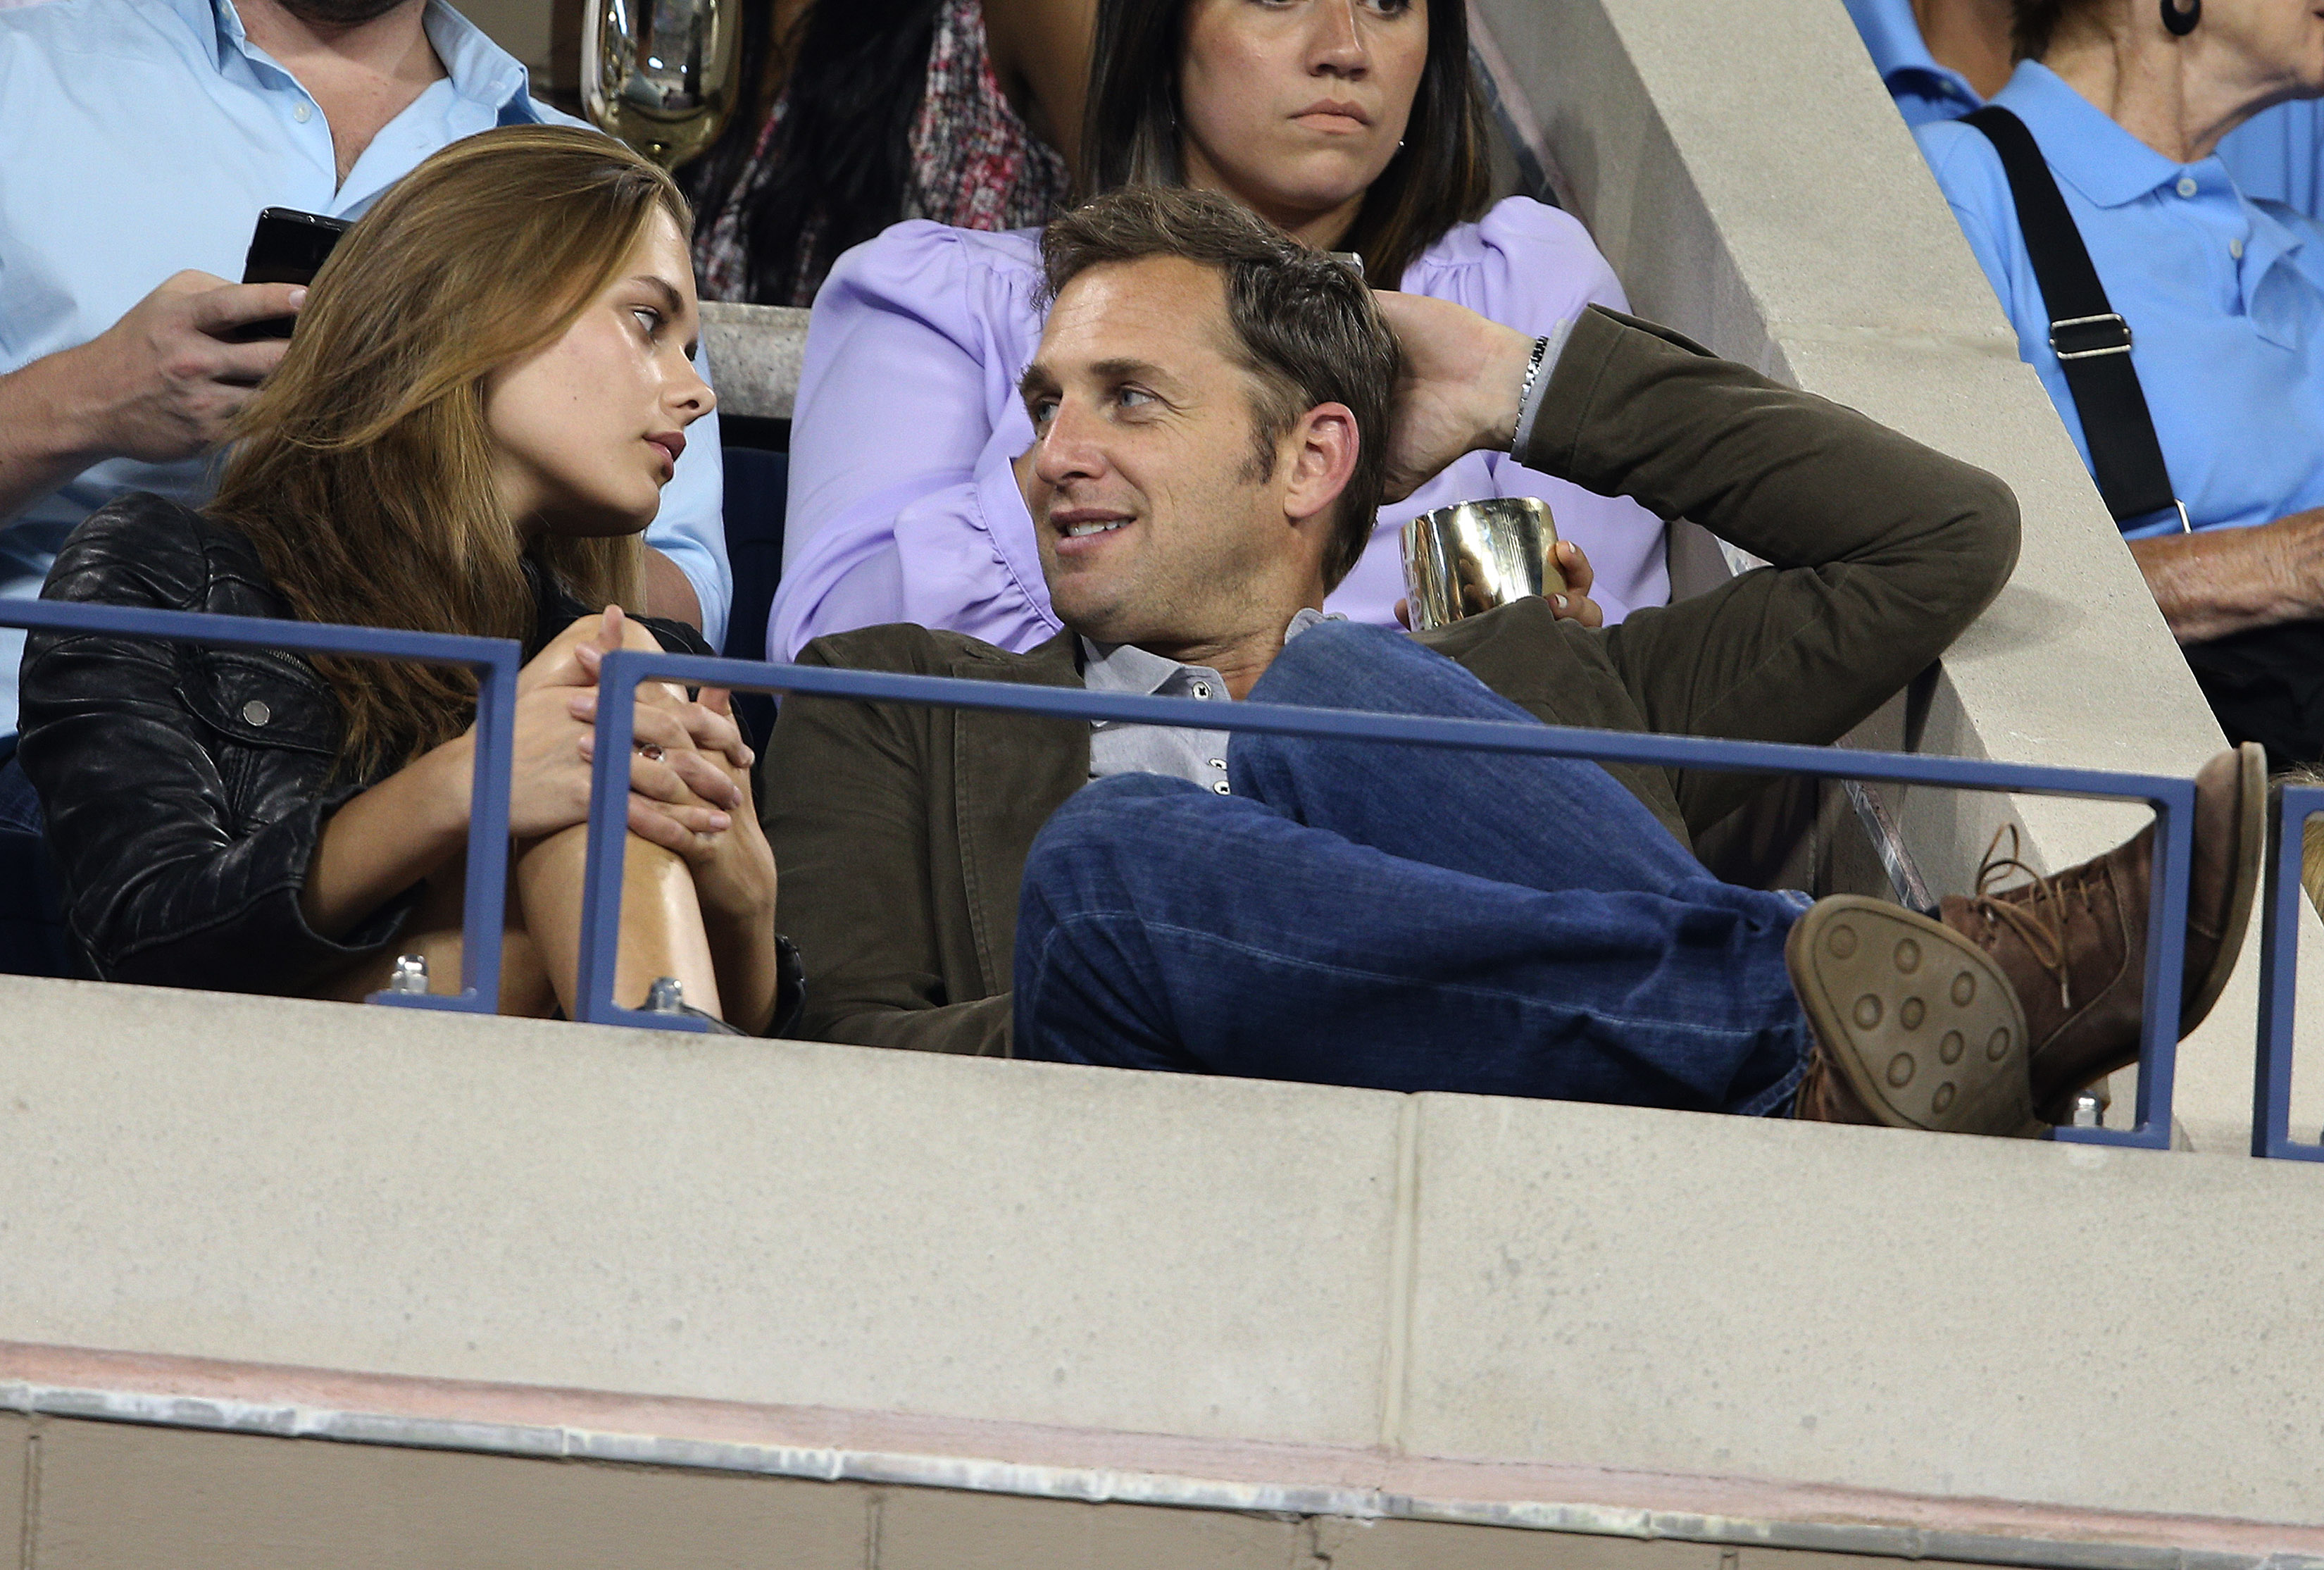 Josh Lucas & model friend Sloveig Mork enjoys opening night of the 2014 US Open Tennis at the Moet suite.